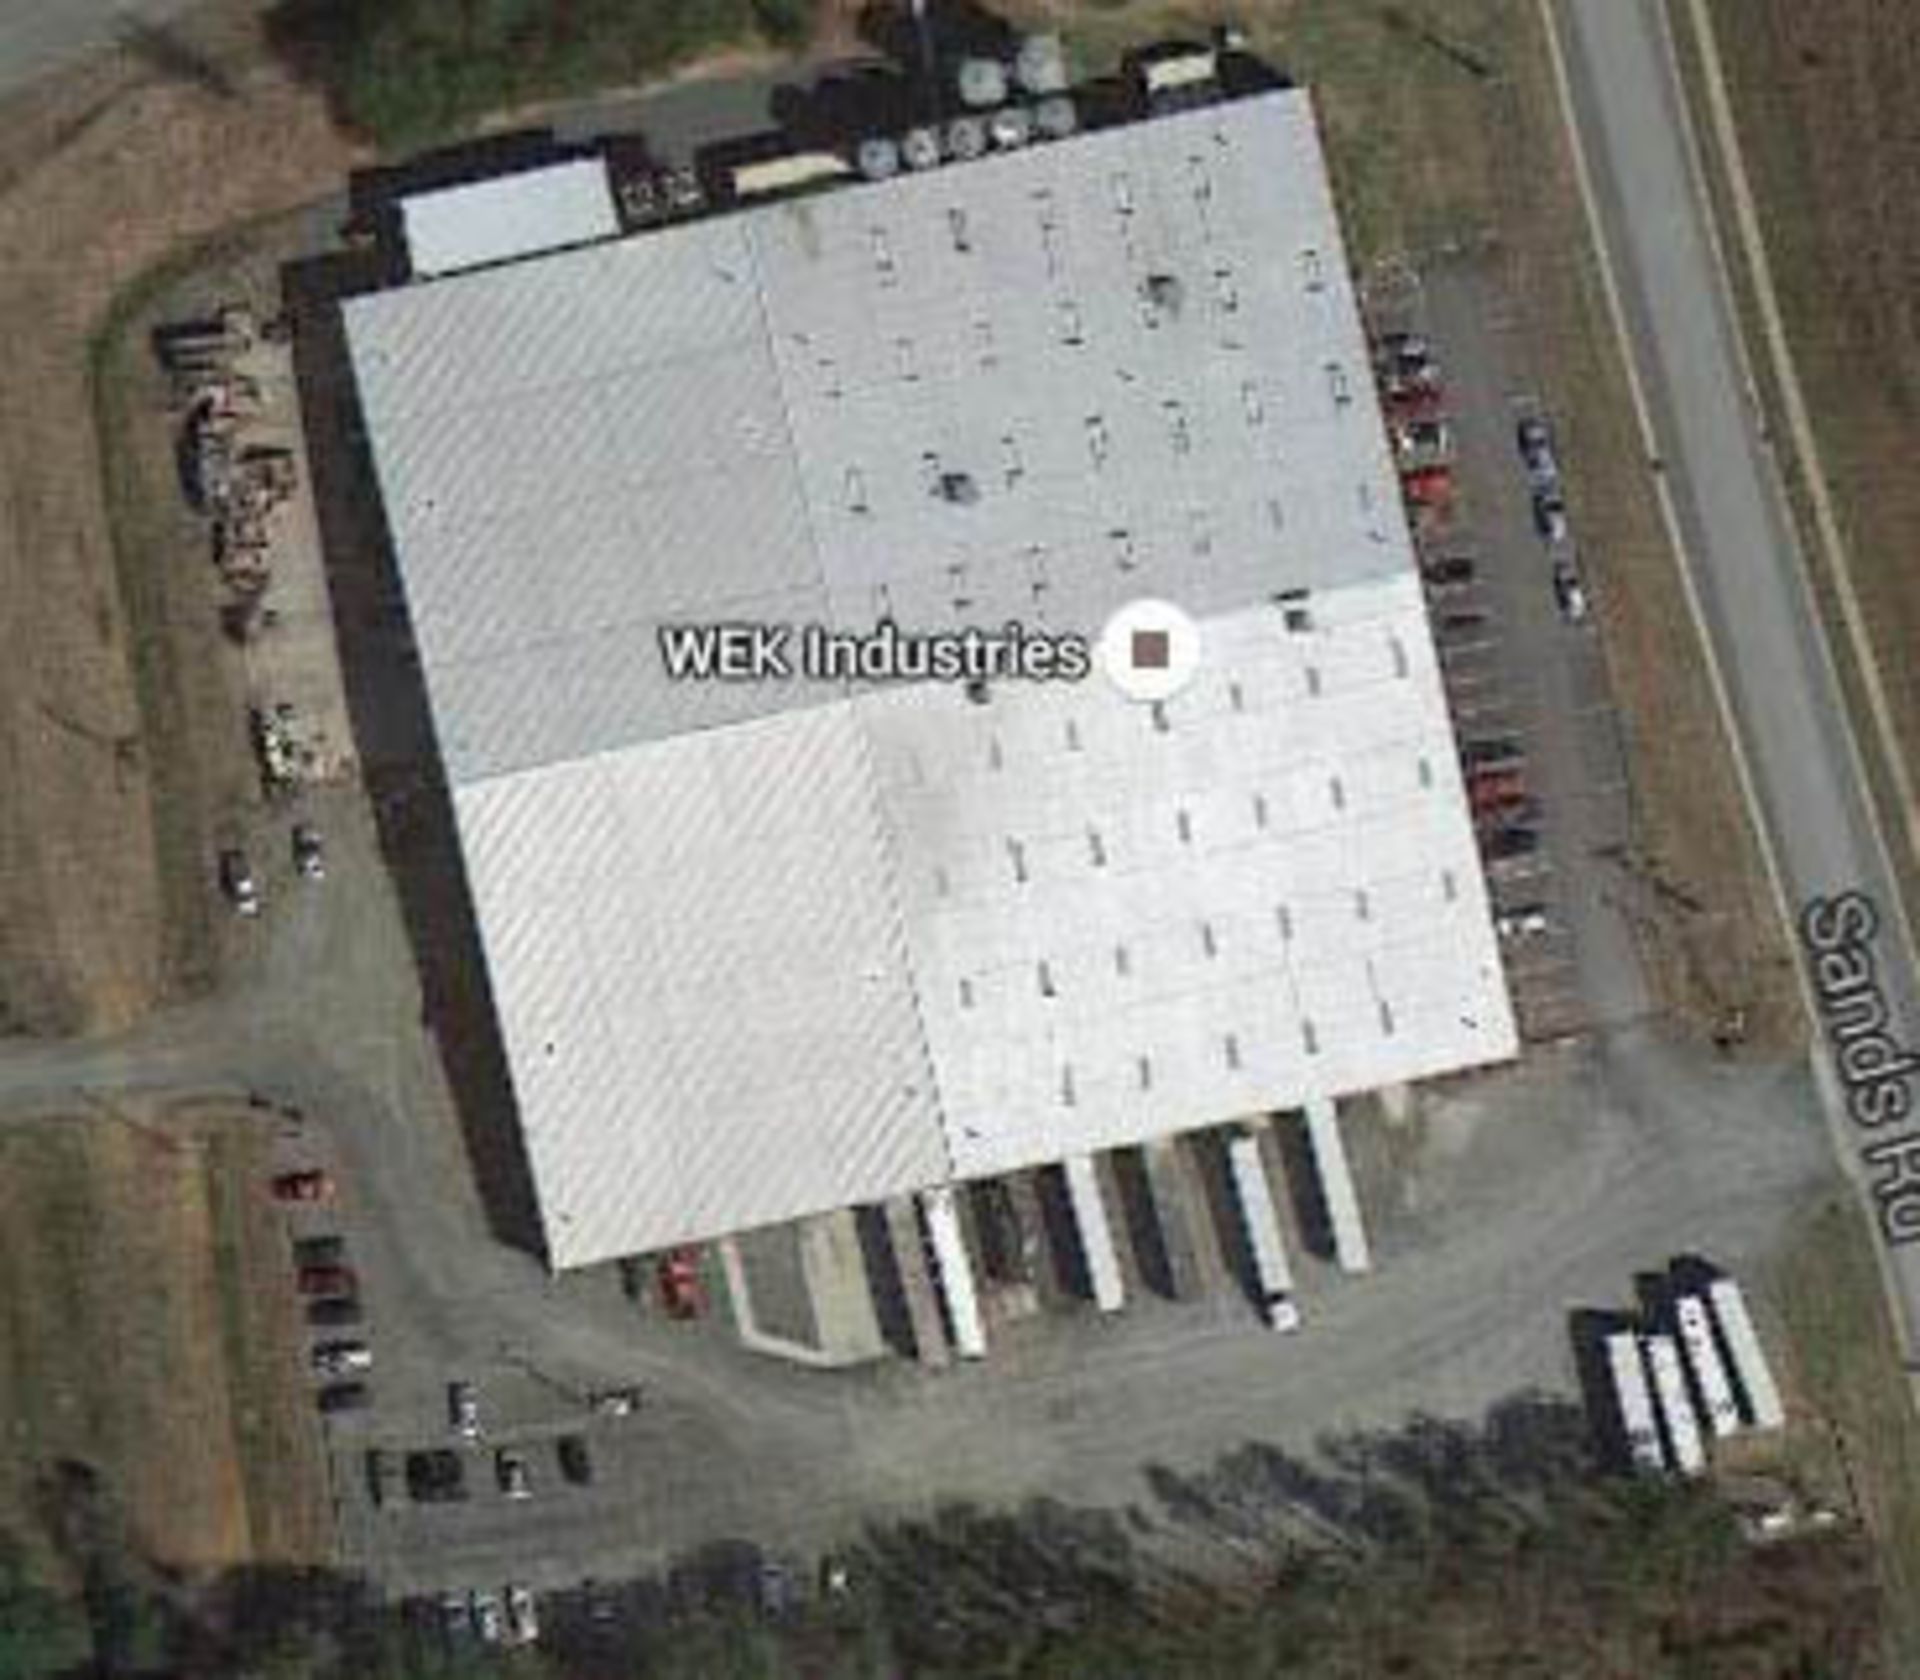 REAL ESTATE: Land - Total Site Acreage Is 17.5 Acres; Gross Building Area - 120,900 SqFt/ - Image 5 of 5